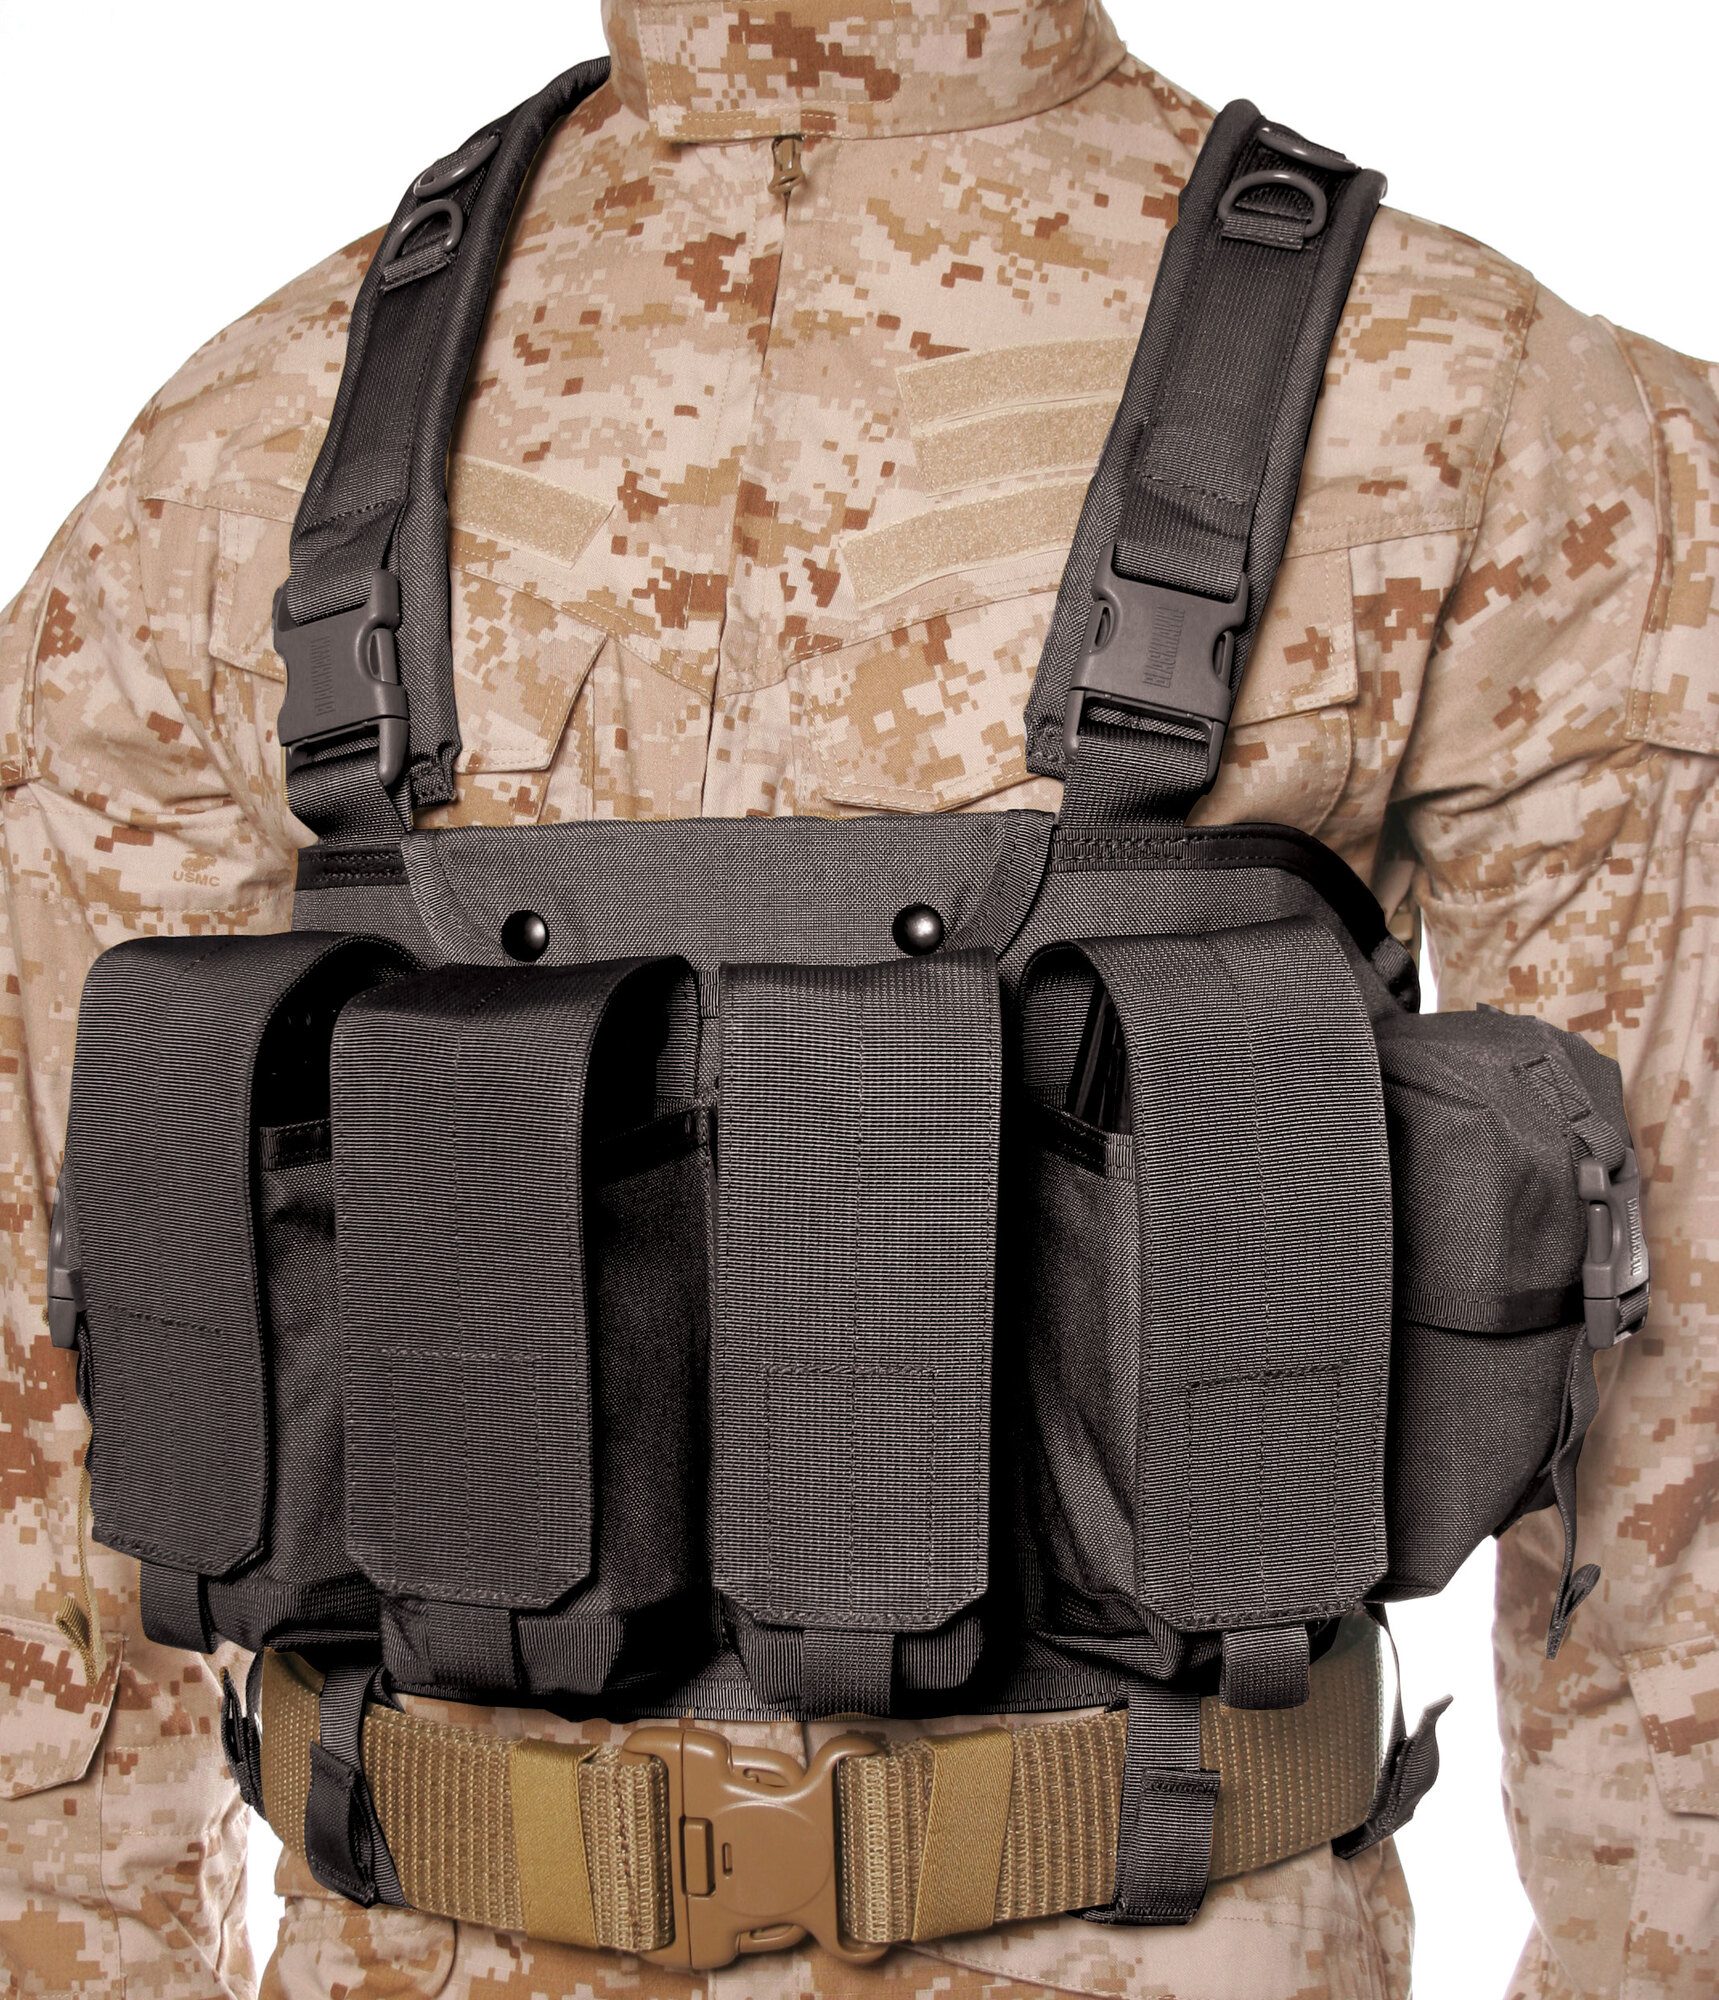 Buy Commando Chest Harness And More